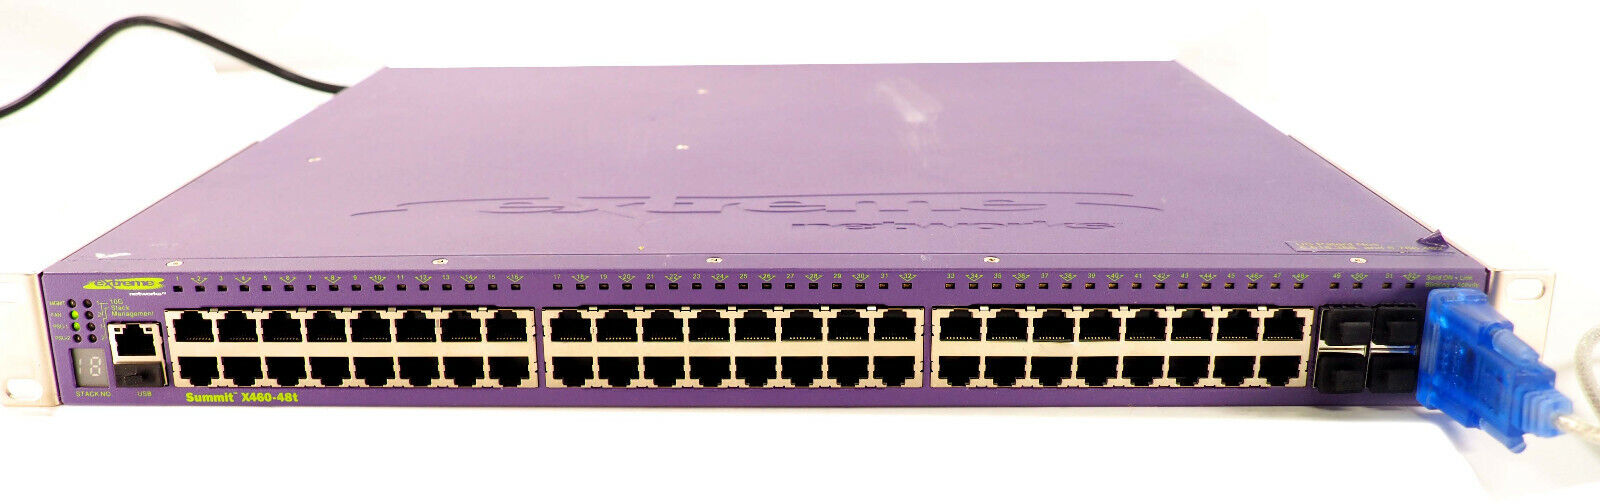 Extreme Networks 16402 Summit X460-48p 48-Port Network Switch 800322-00-07